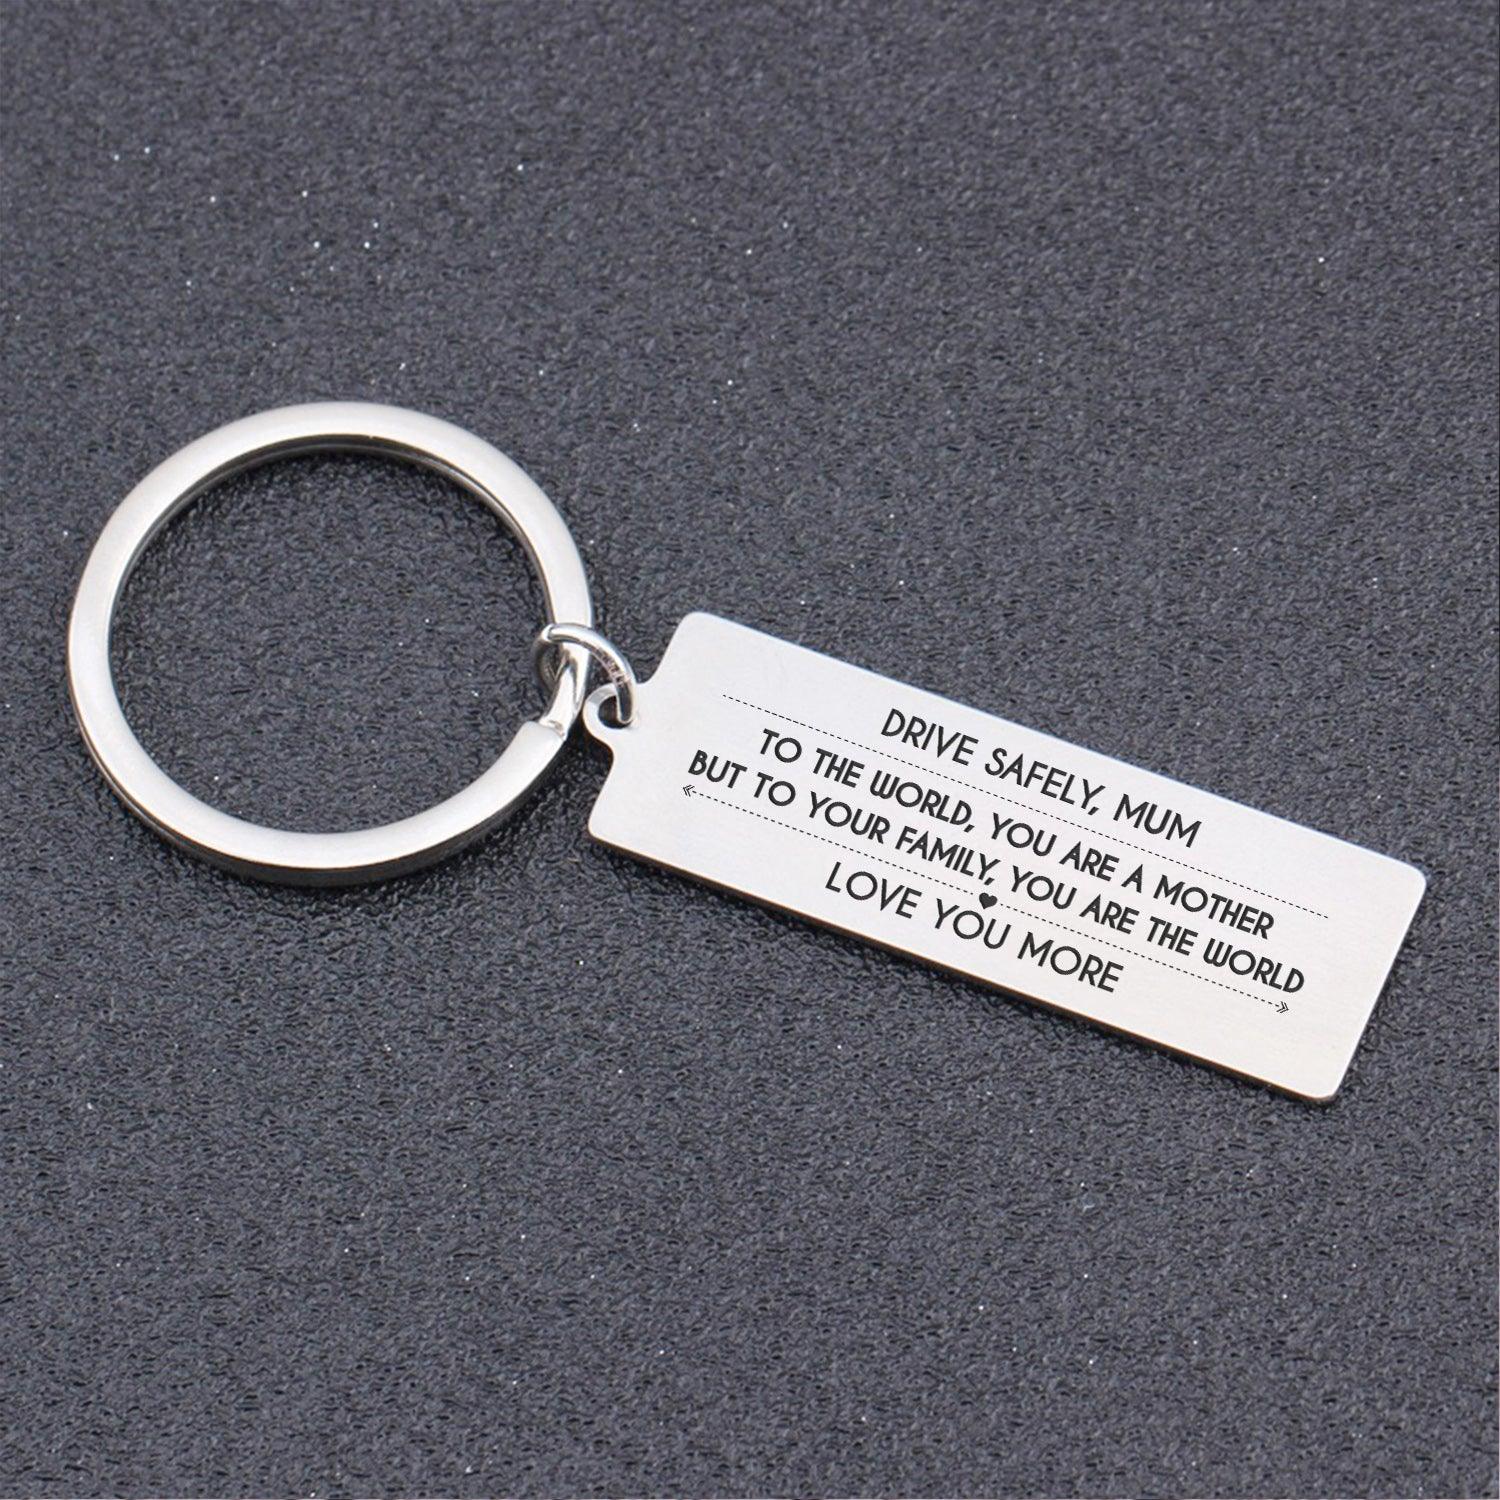 Engraved Keychain - Family - To My Mum - You Are The World - Augkc19011 - Gifts Holder